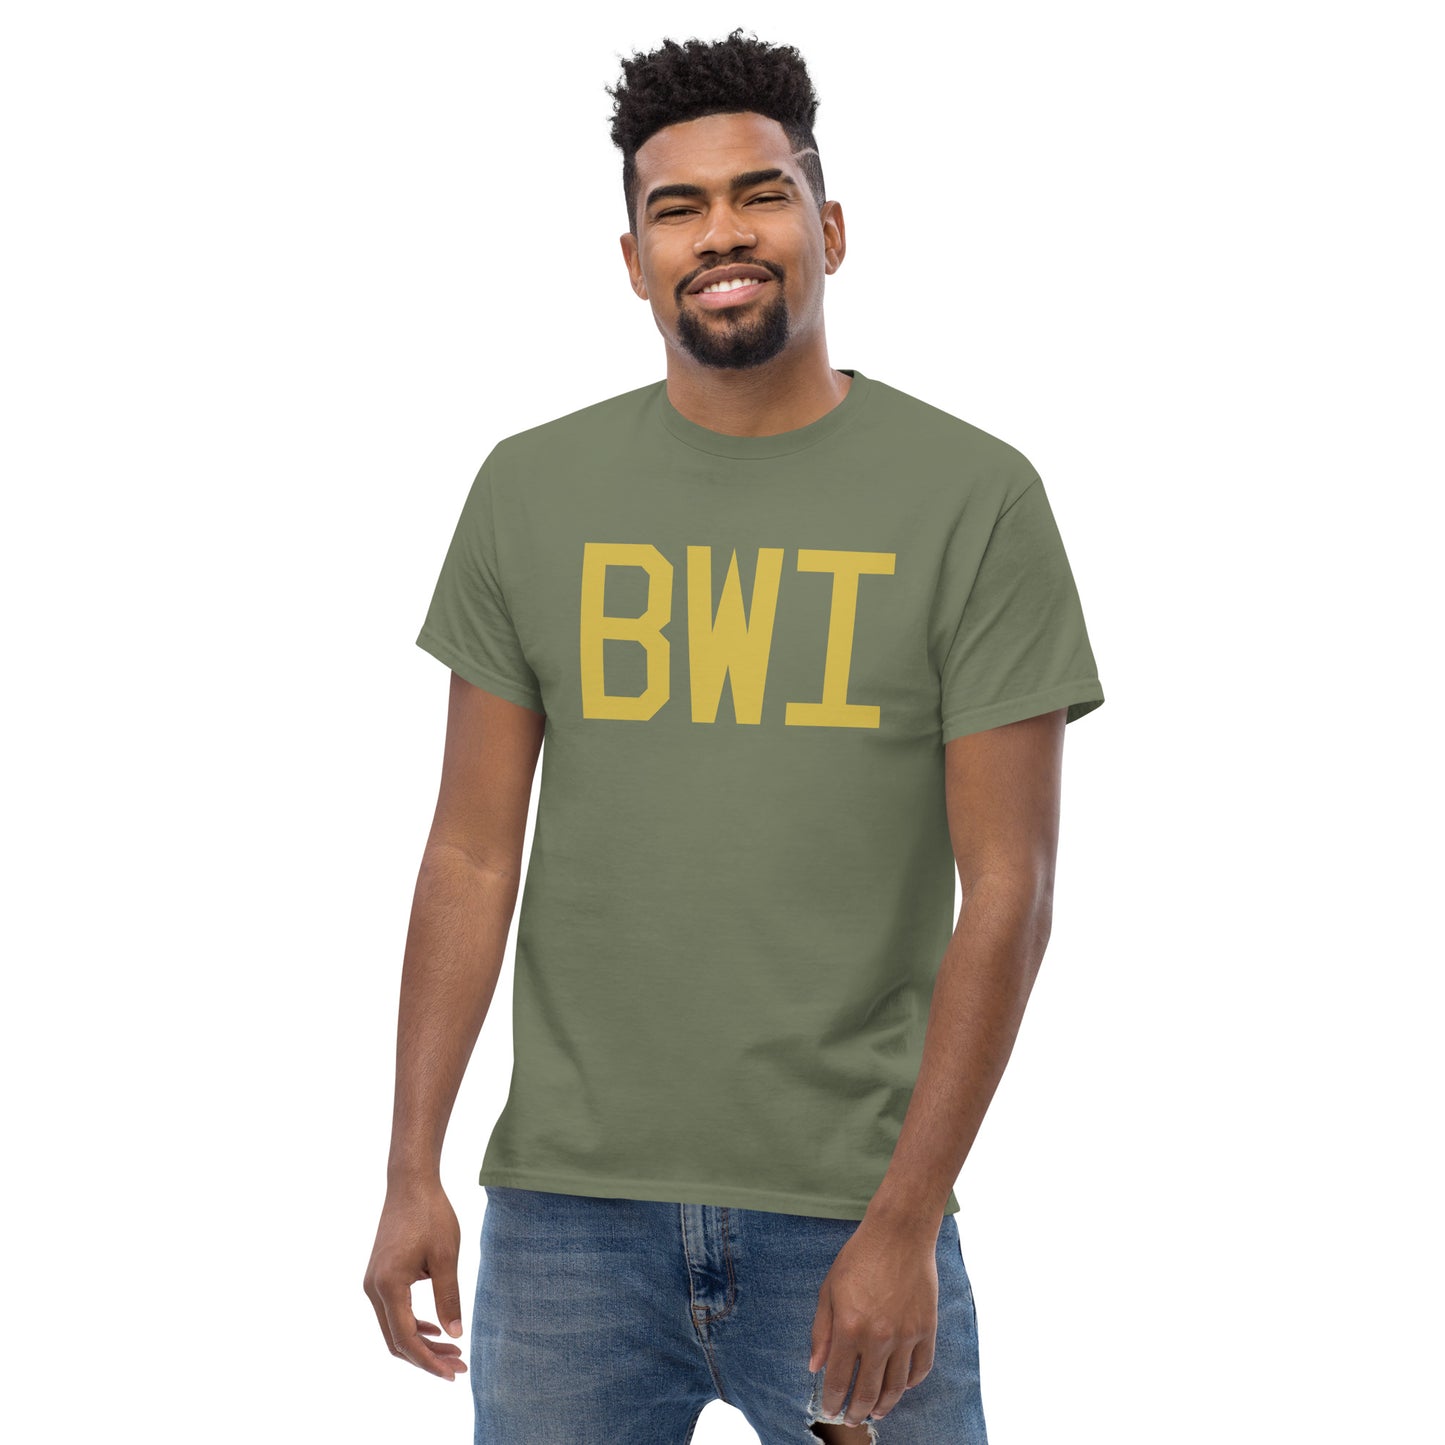 Aviation Enthusiast Men's Tee - Old Gold Graphic • BWI Baltimore • YHM Designs - Image 06